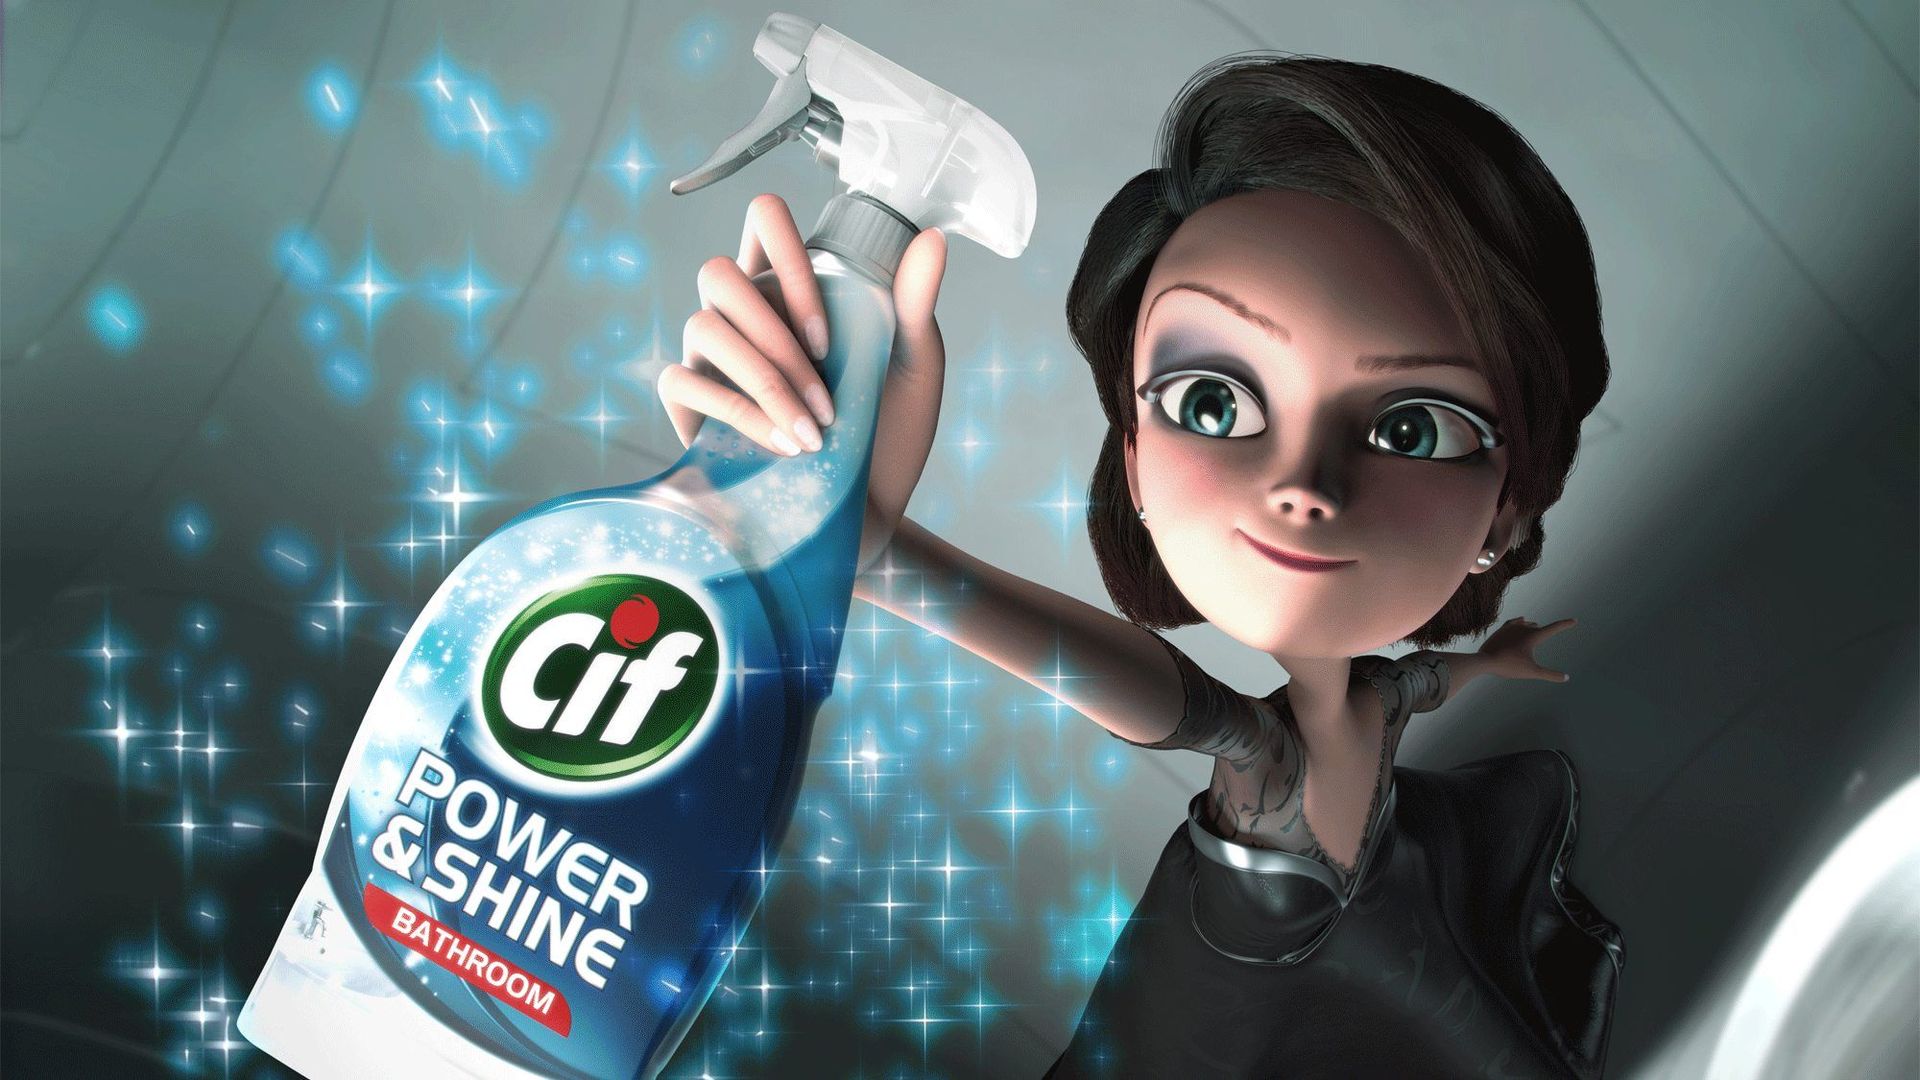 Animated Cif fairy holding cleaning spray